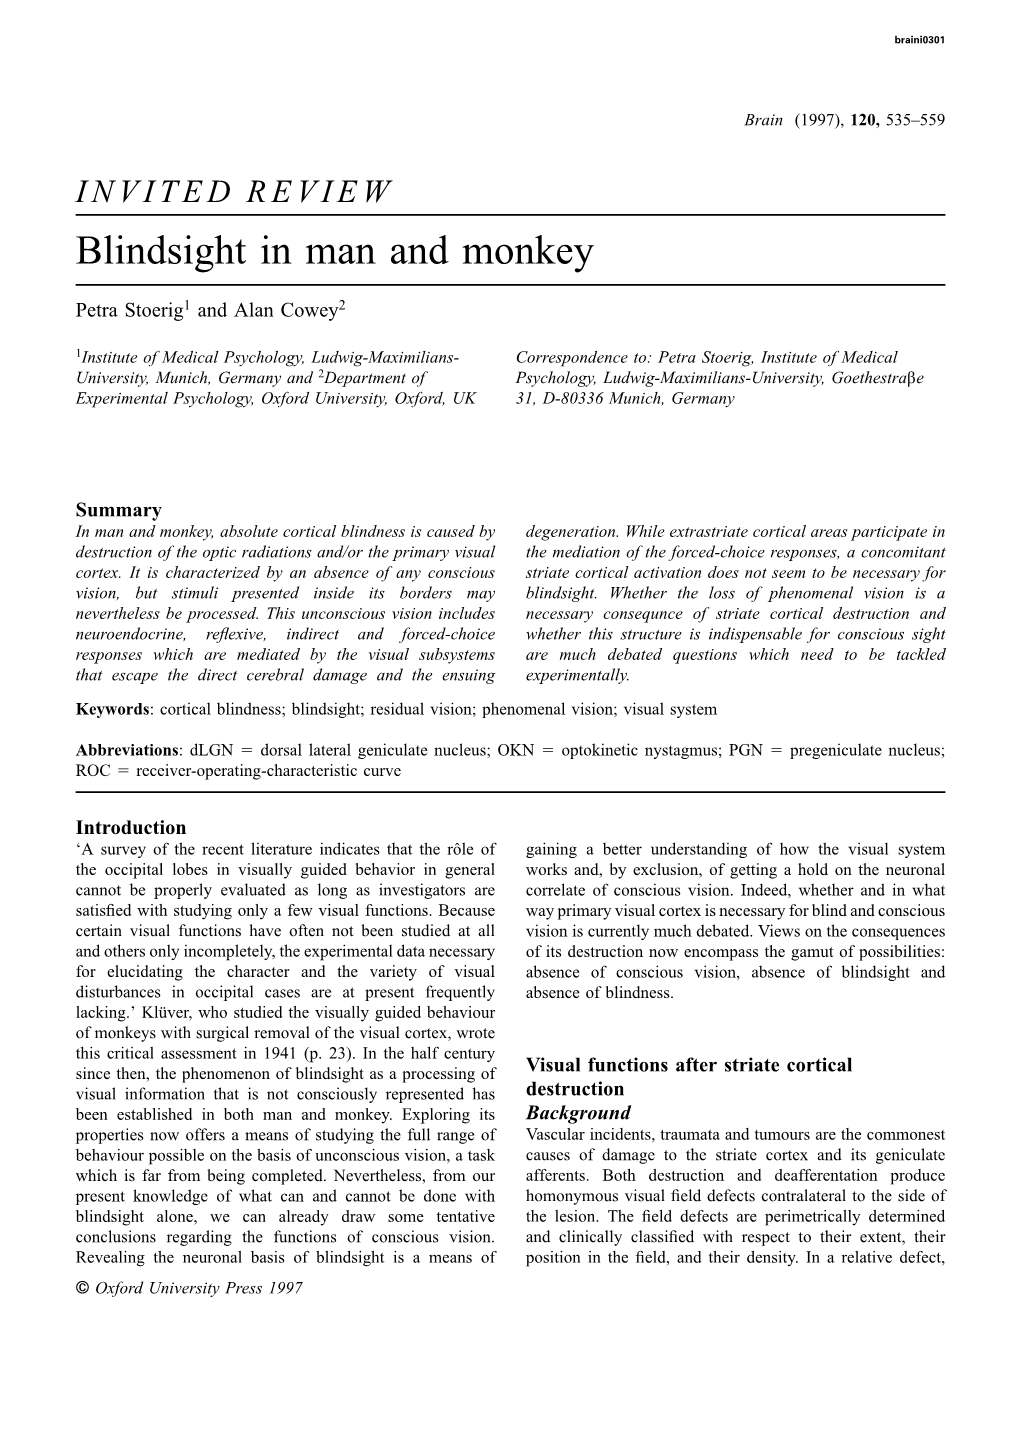 Blindsight in Man and Monkey